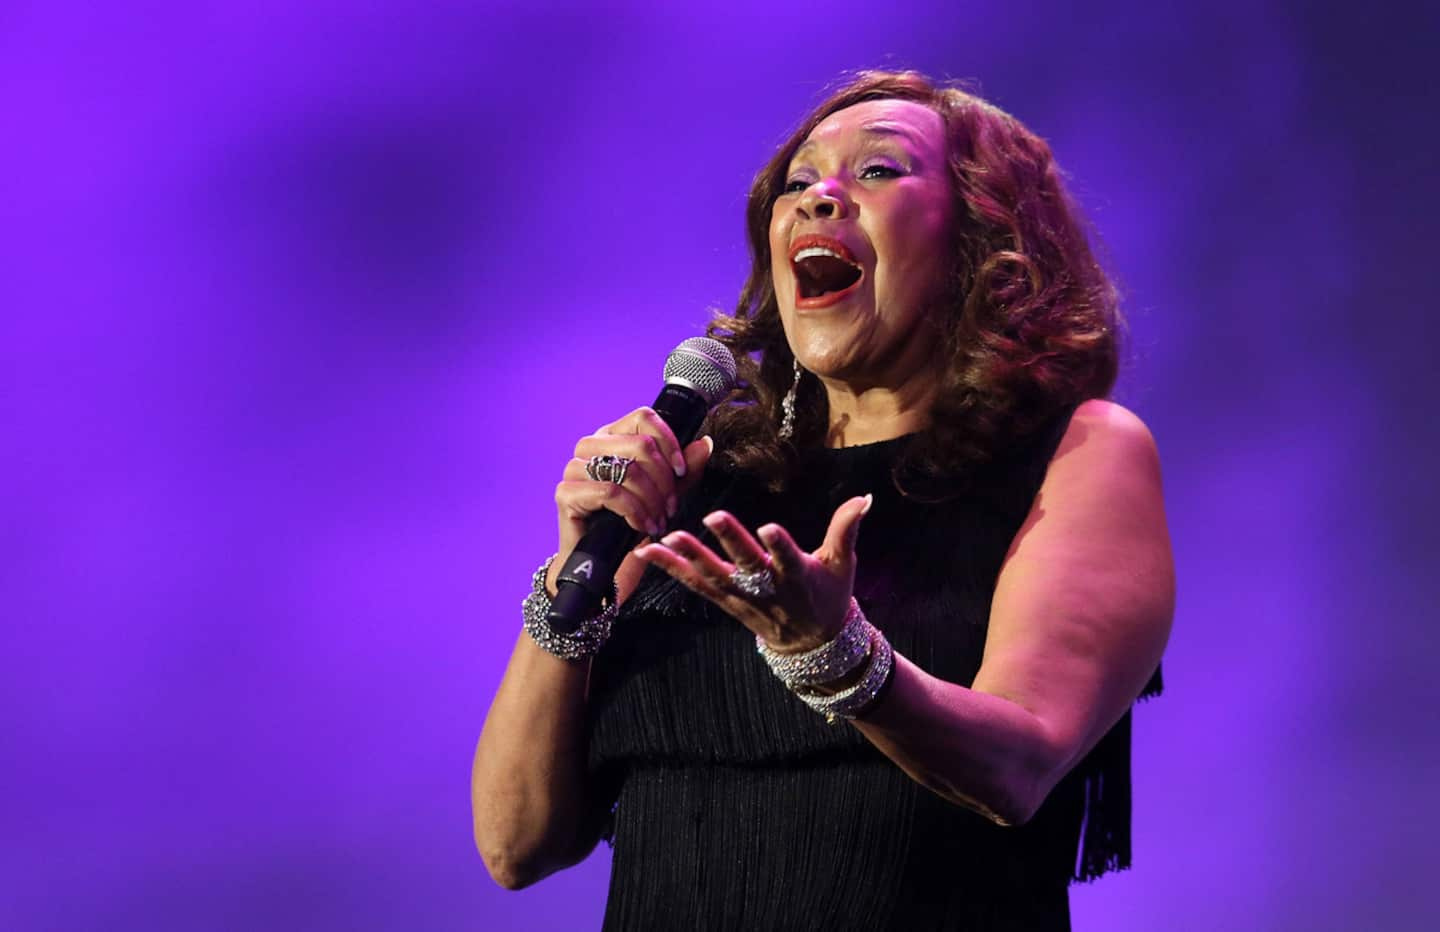 Death at 74 of Anita, founding member of the Pointer Sisters